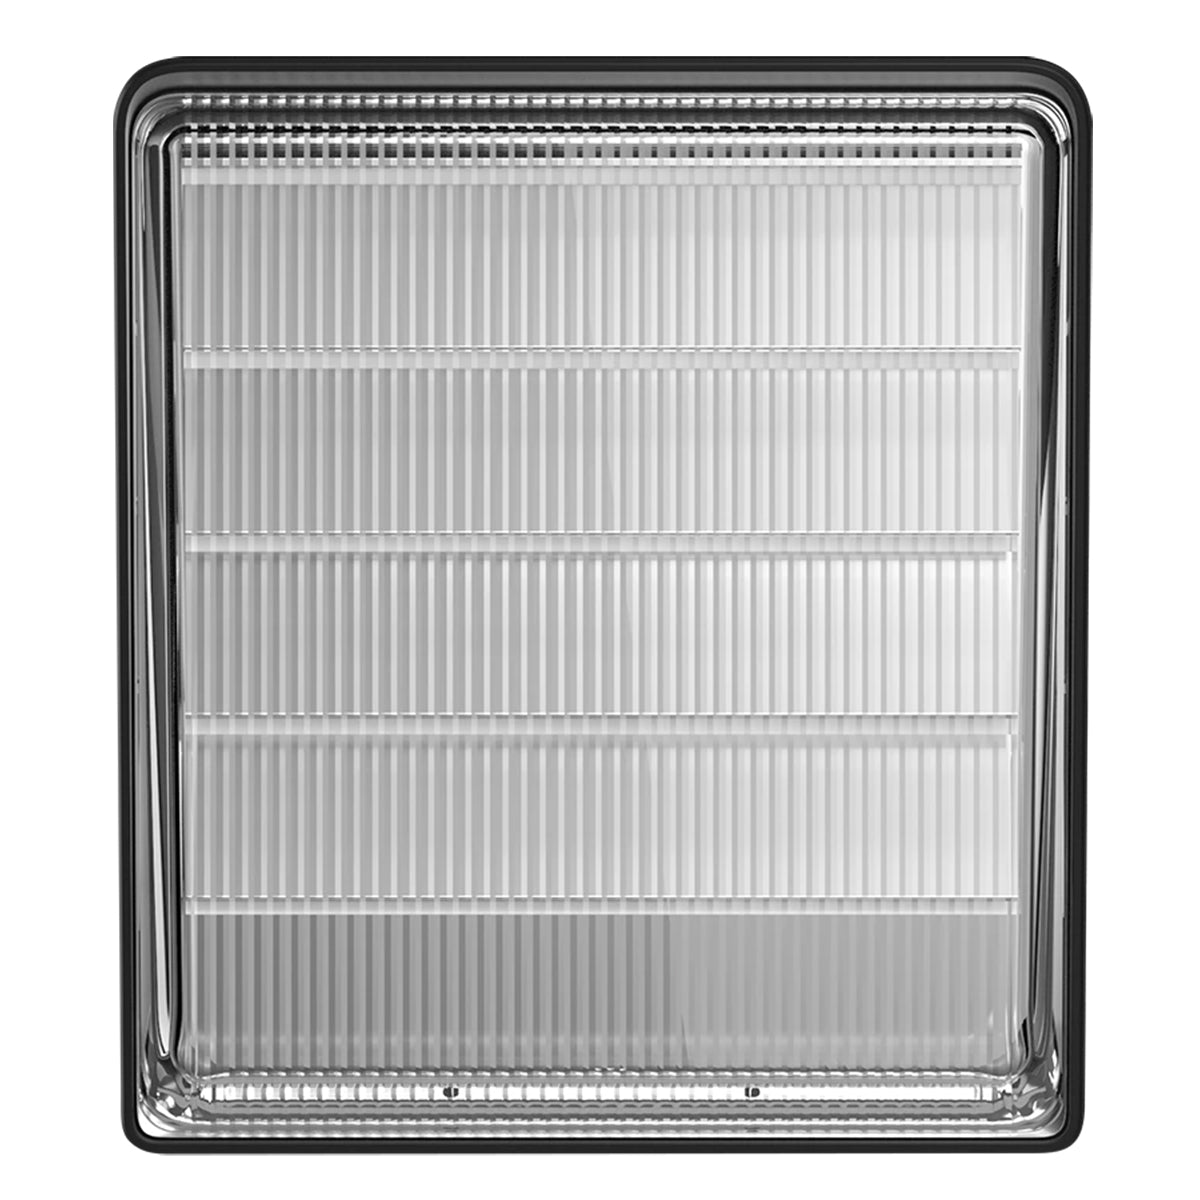 LED Standard Wall Pack With Photocell, 17/25/35 Watts Field Adjustable, 30K/40K/50K, 120-277V